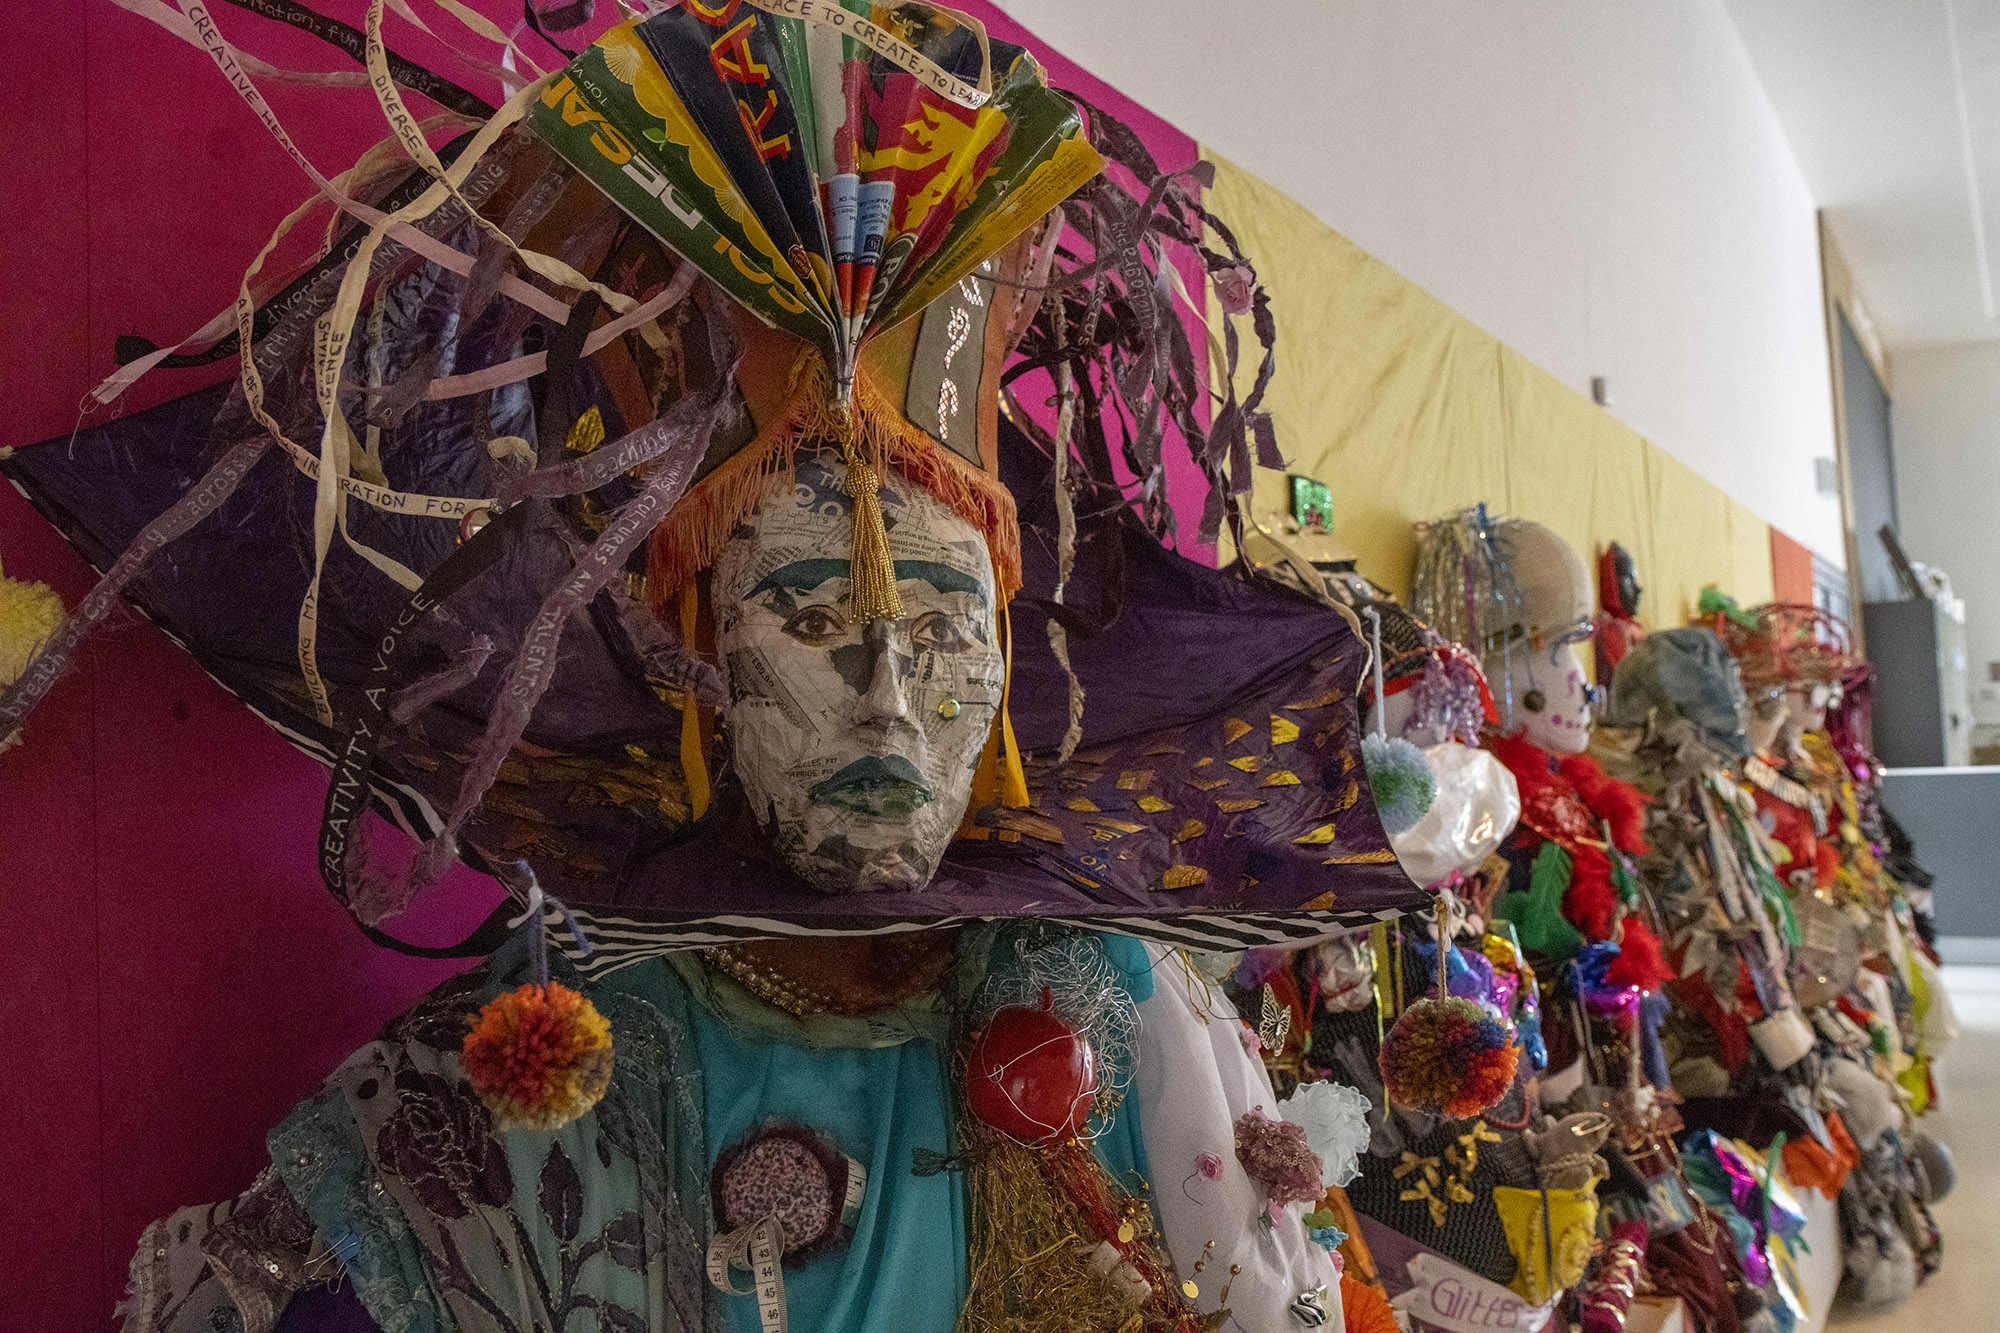 A set of sculptures on display in the Herbert. In the foreground is "Frida", a mannequin with a newspaper face and eyes cut out from a magazine. On top of her head is an orange, fringed lampshade with a coloured card fan fixed to the front, and ribbons with messages written on them. Around her neck is an upside down umbrella, painted with patterns and decorated with pom poms.